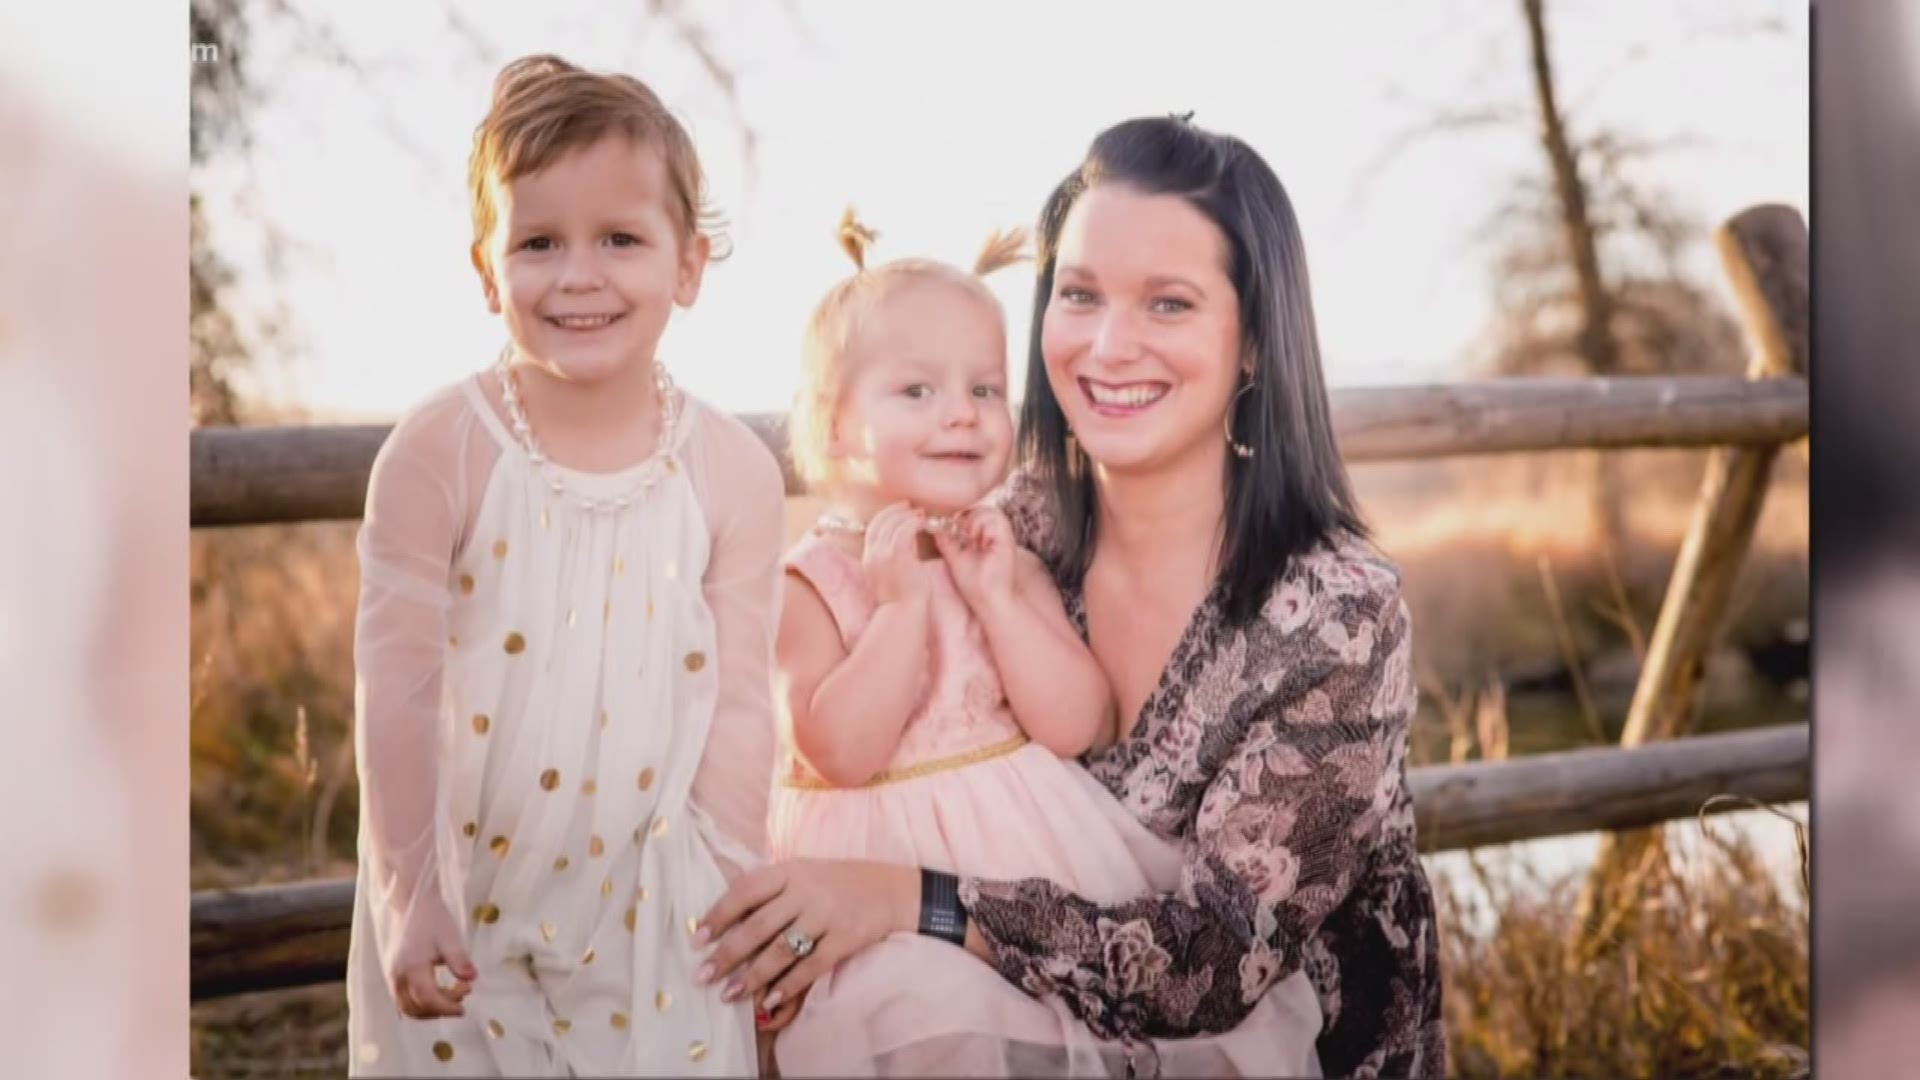 In April, the house where Chris Watts murdered his wife, Shanann, and two daughters, Bella and Celeste, will be auctioned off.